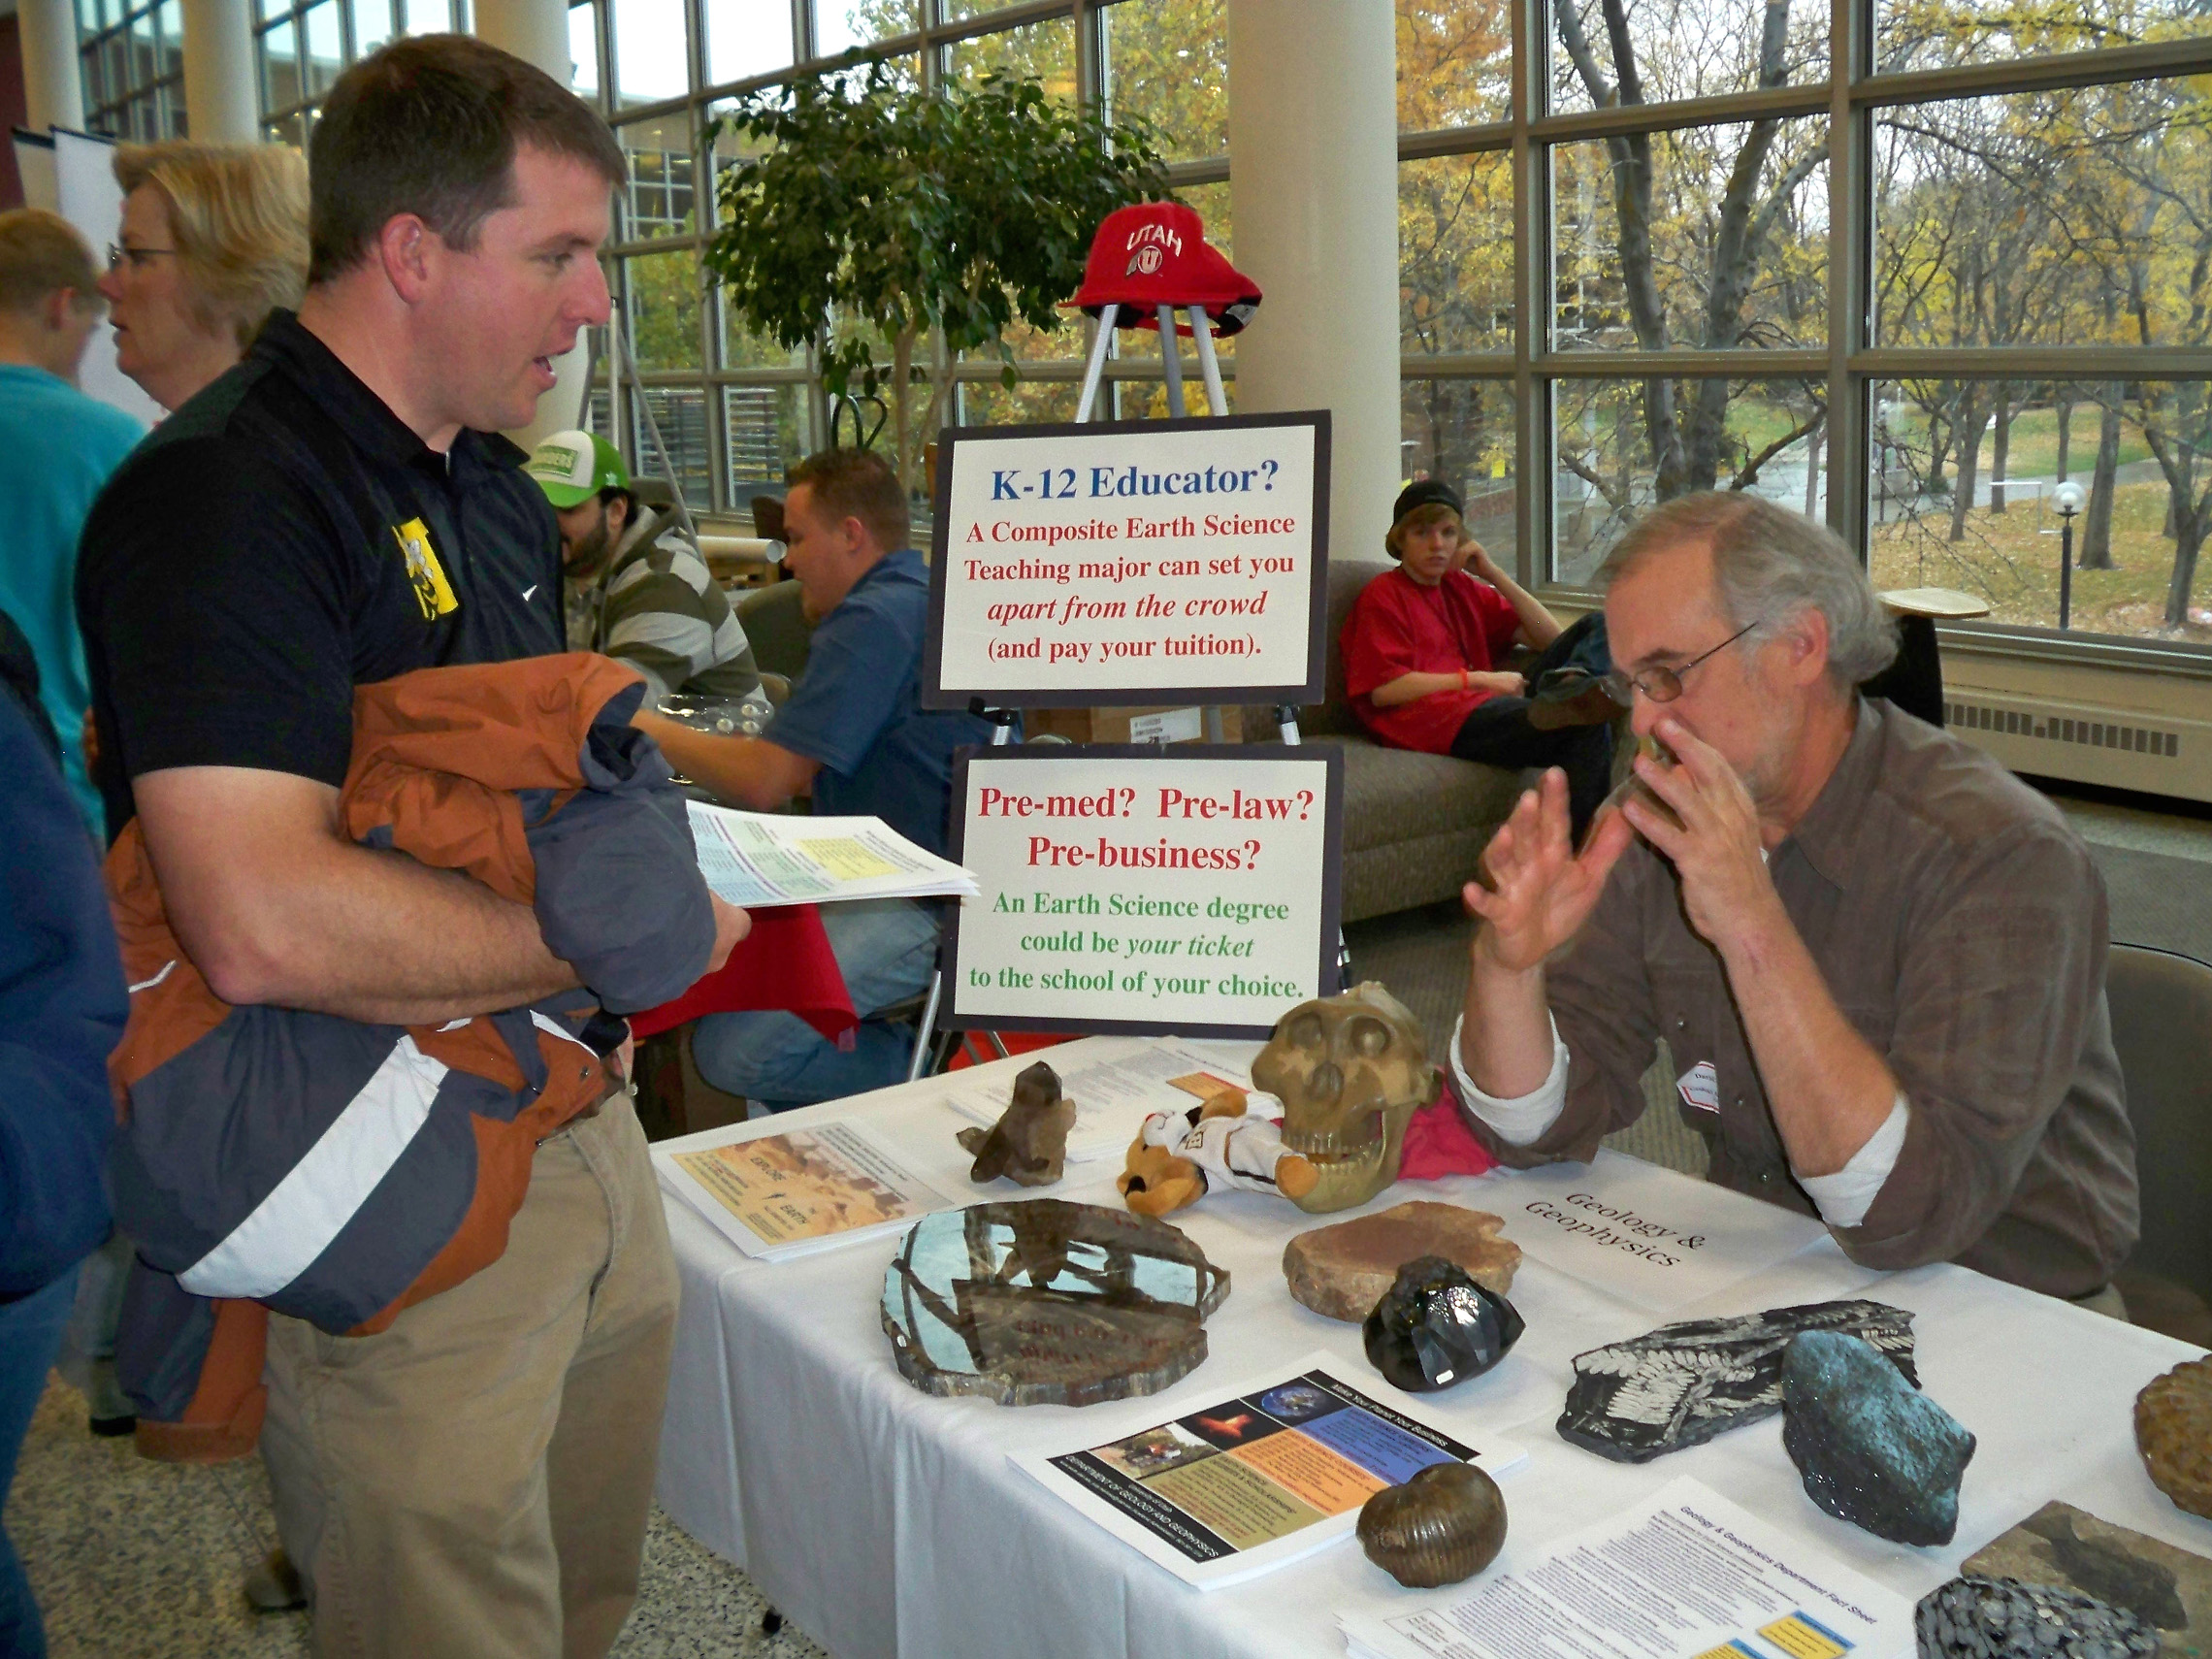 Faculty members provide advice on science majors and science-related careers such as geology during the annual Science Day at the U, which is the University of Utah's largest student recruitment event, usually drawing about 800 high school students from Utah and Idaho.